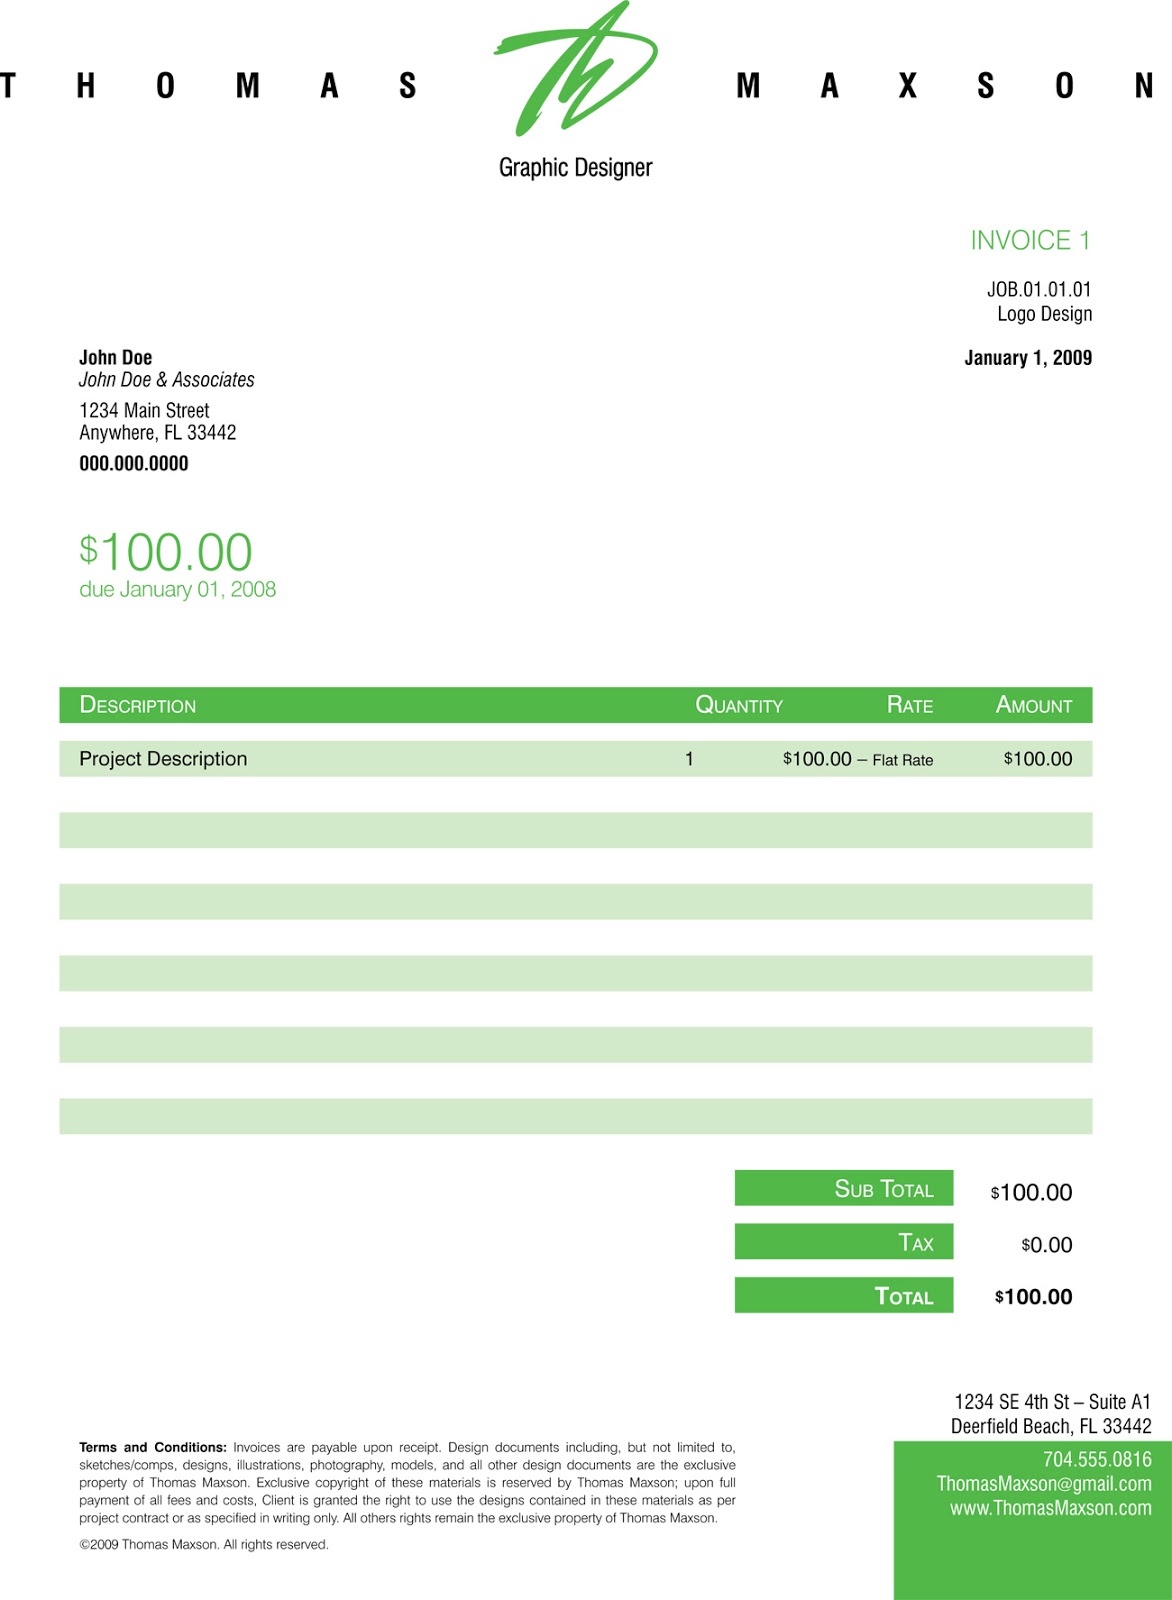 Freelance Invoice Template Excel  invoice example